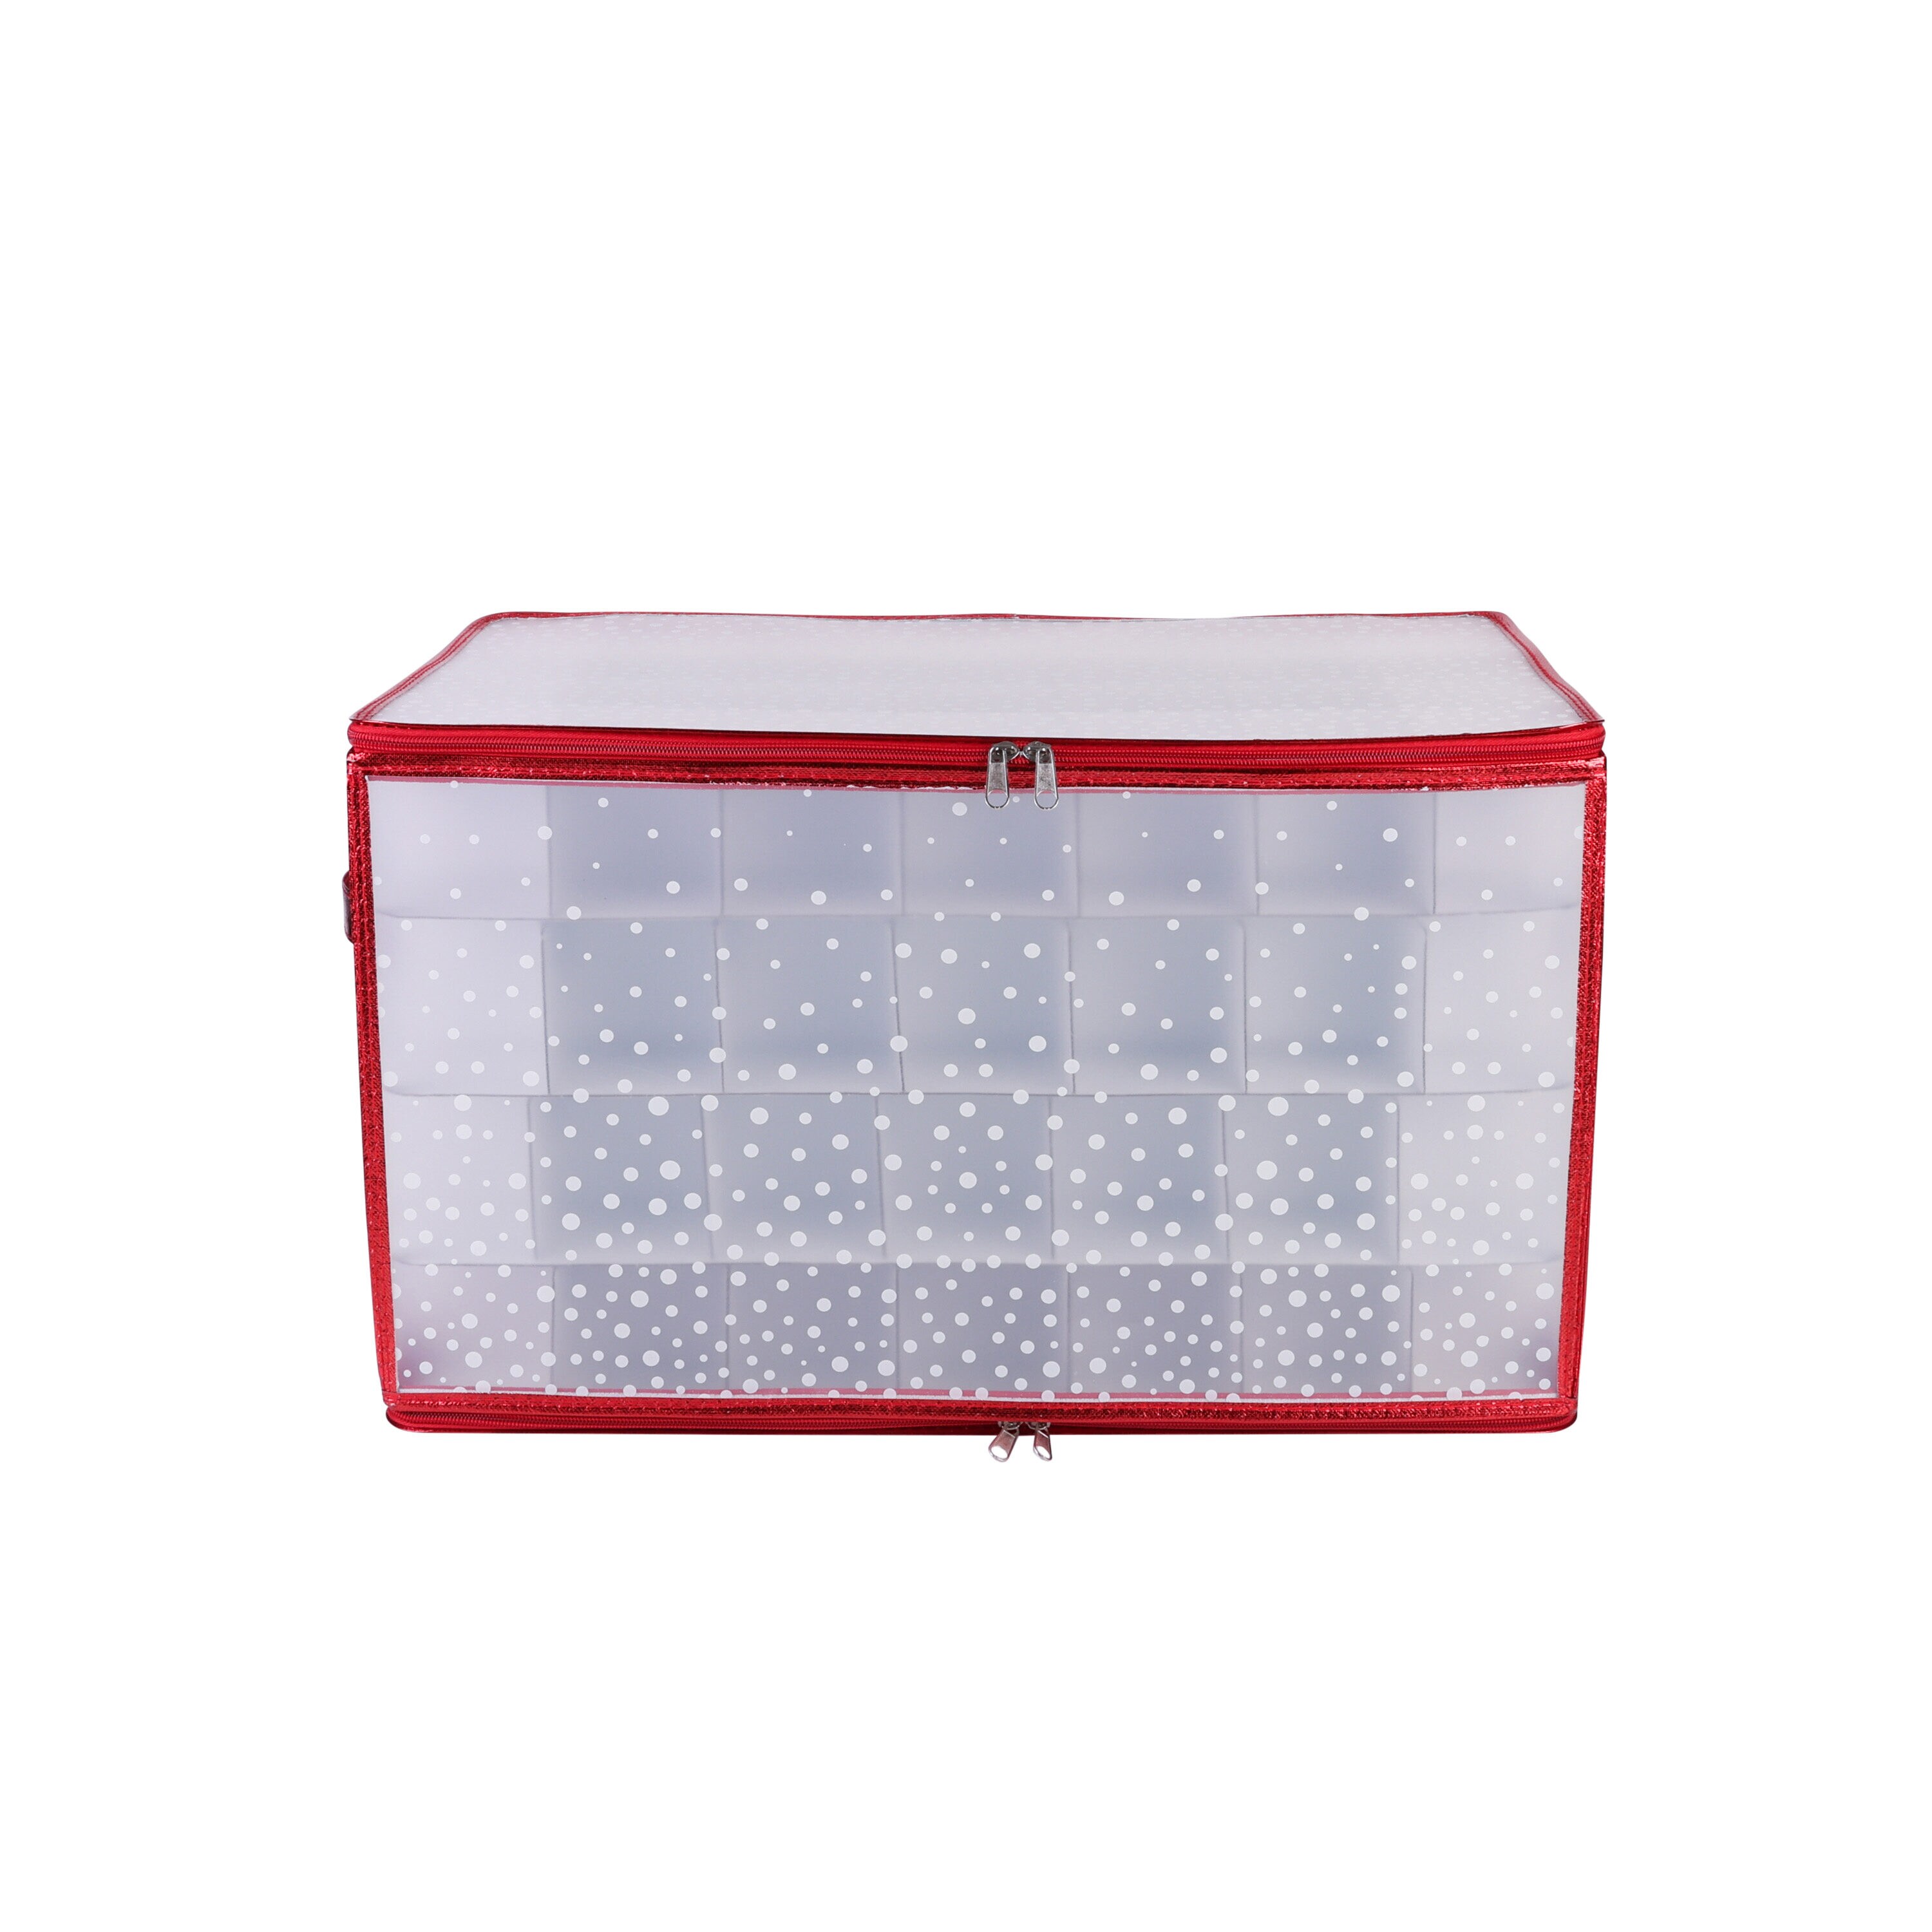 Simplify 64 Count Stackable Christmas Ornament Storage Box - Red